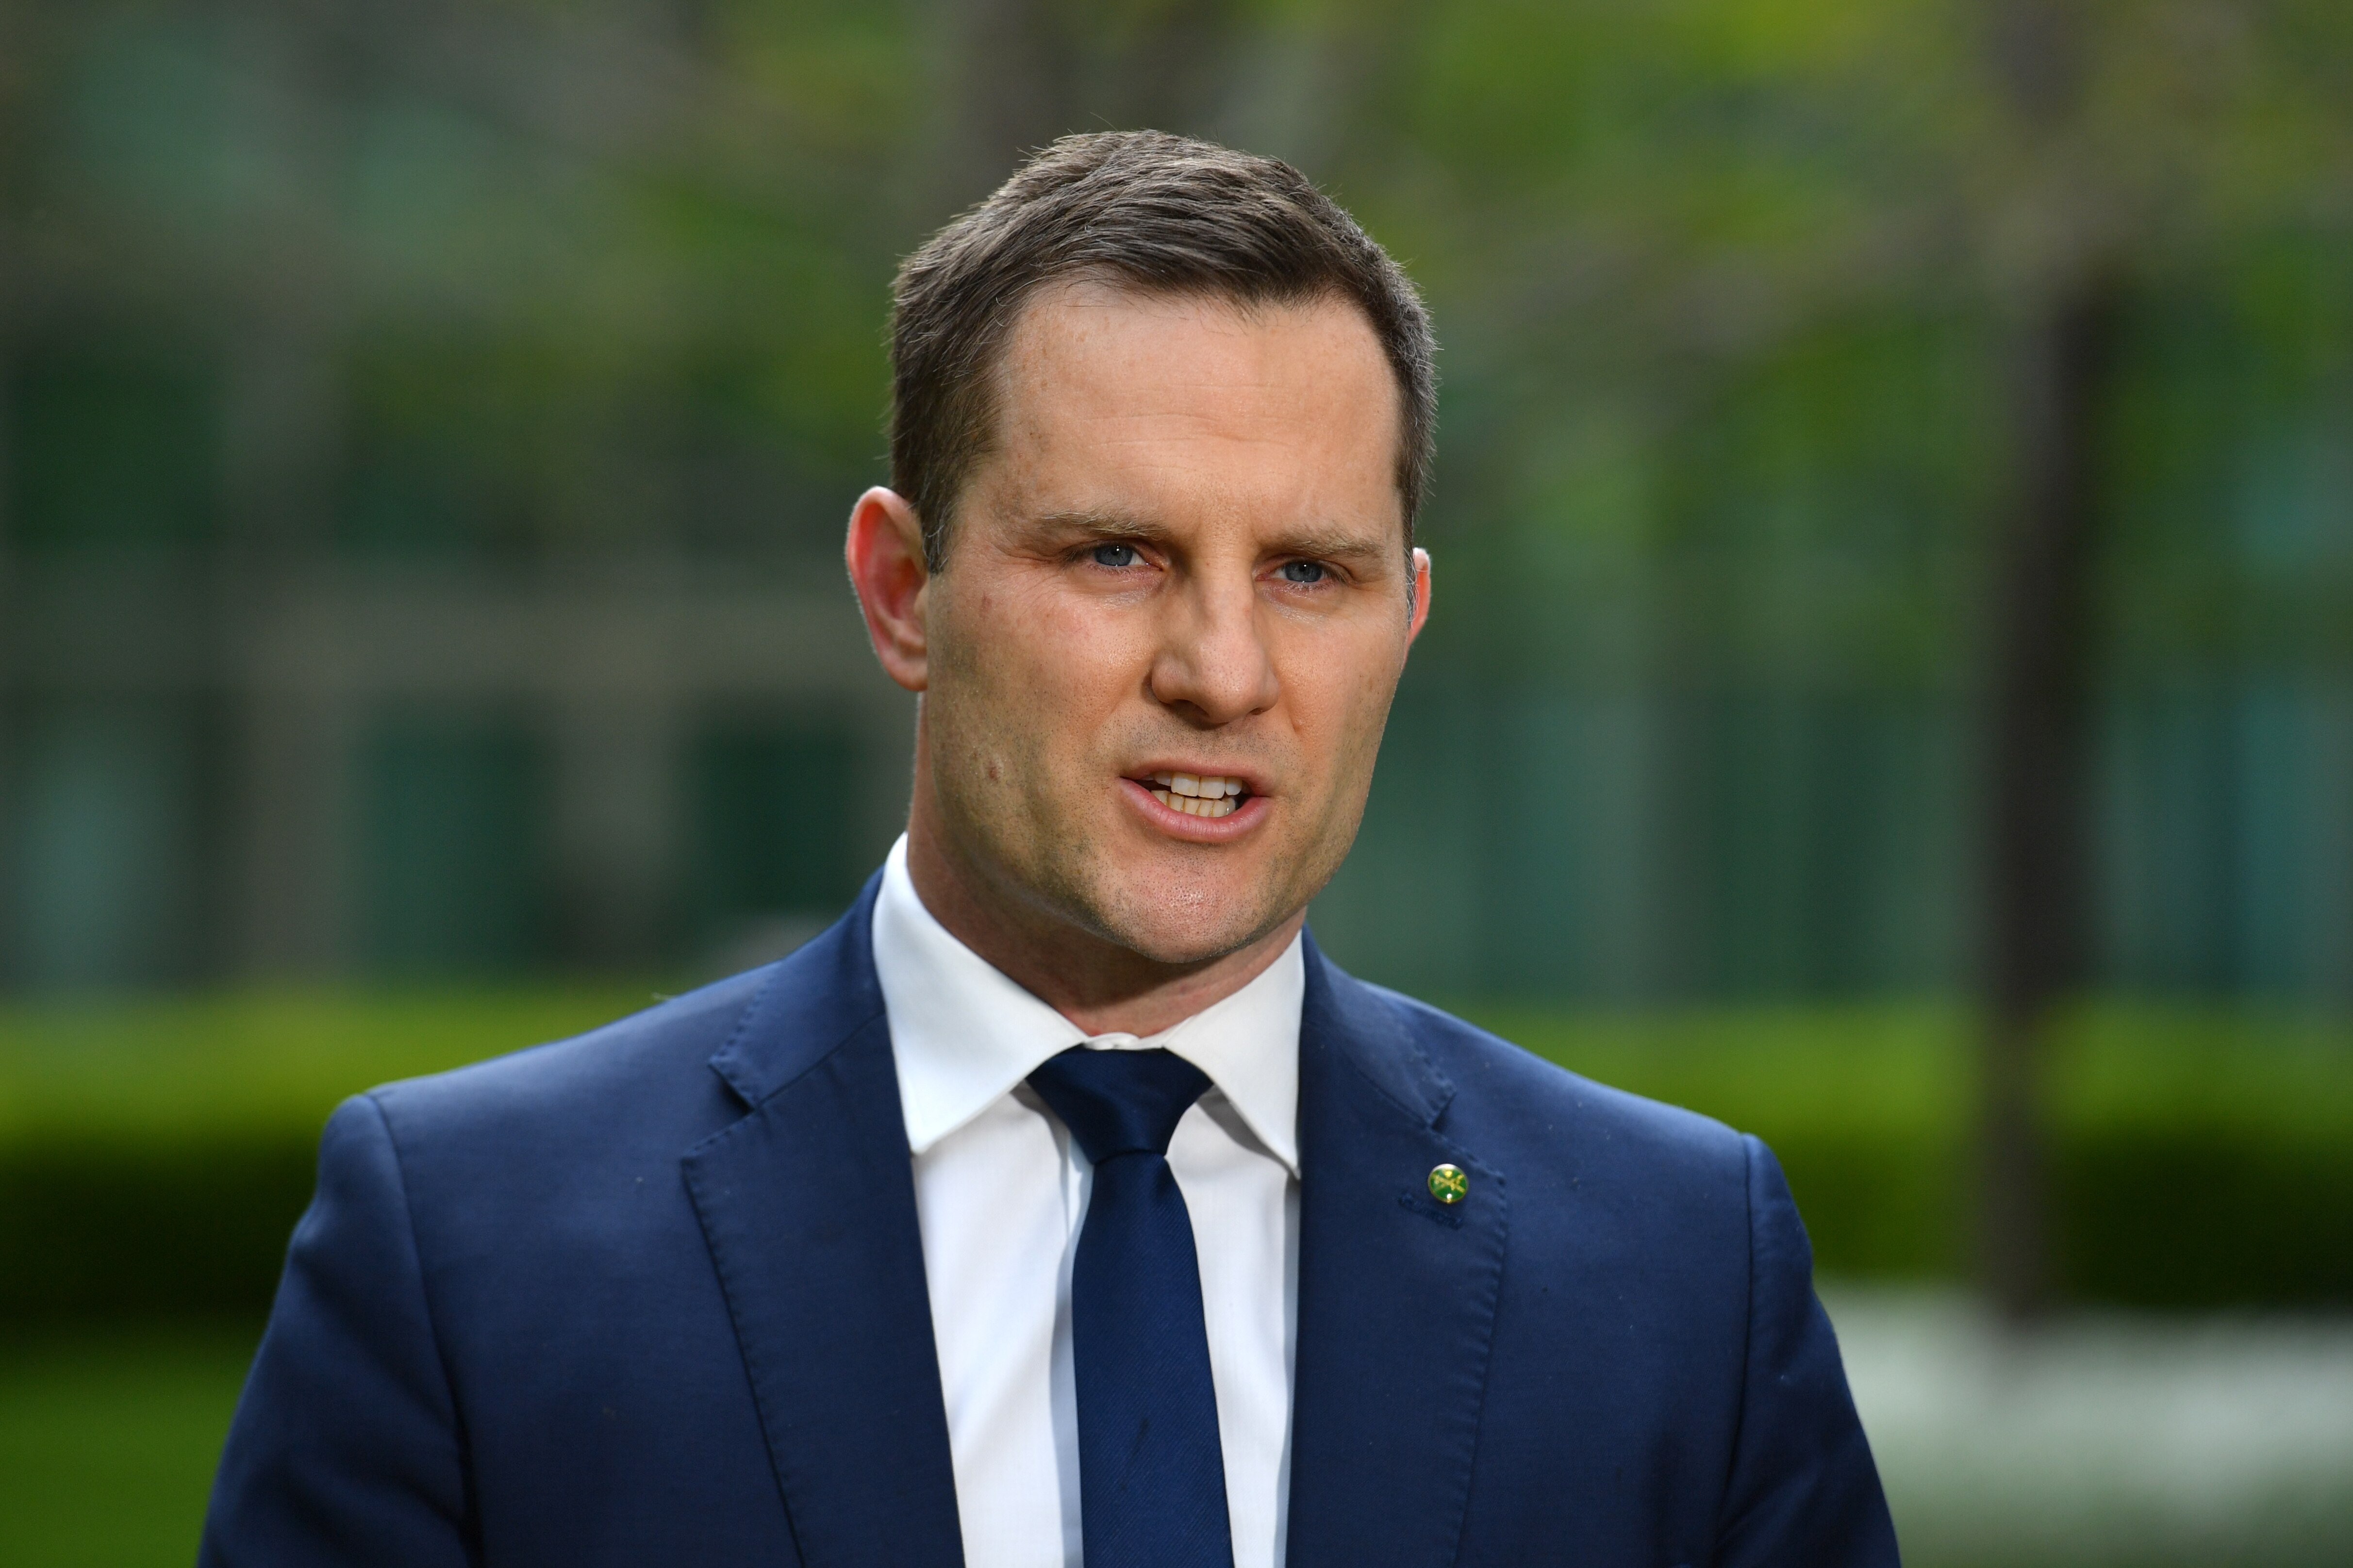 Immigration Minister Alex Hawke has said the laws send a 'clear message' the Australian community has no tolerance for non-citizens who commit serious crimes.